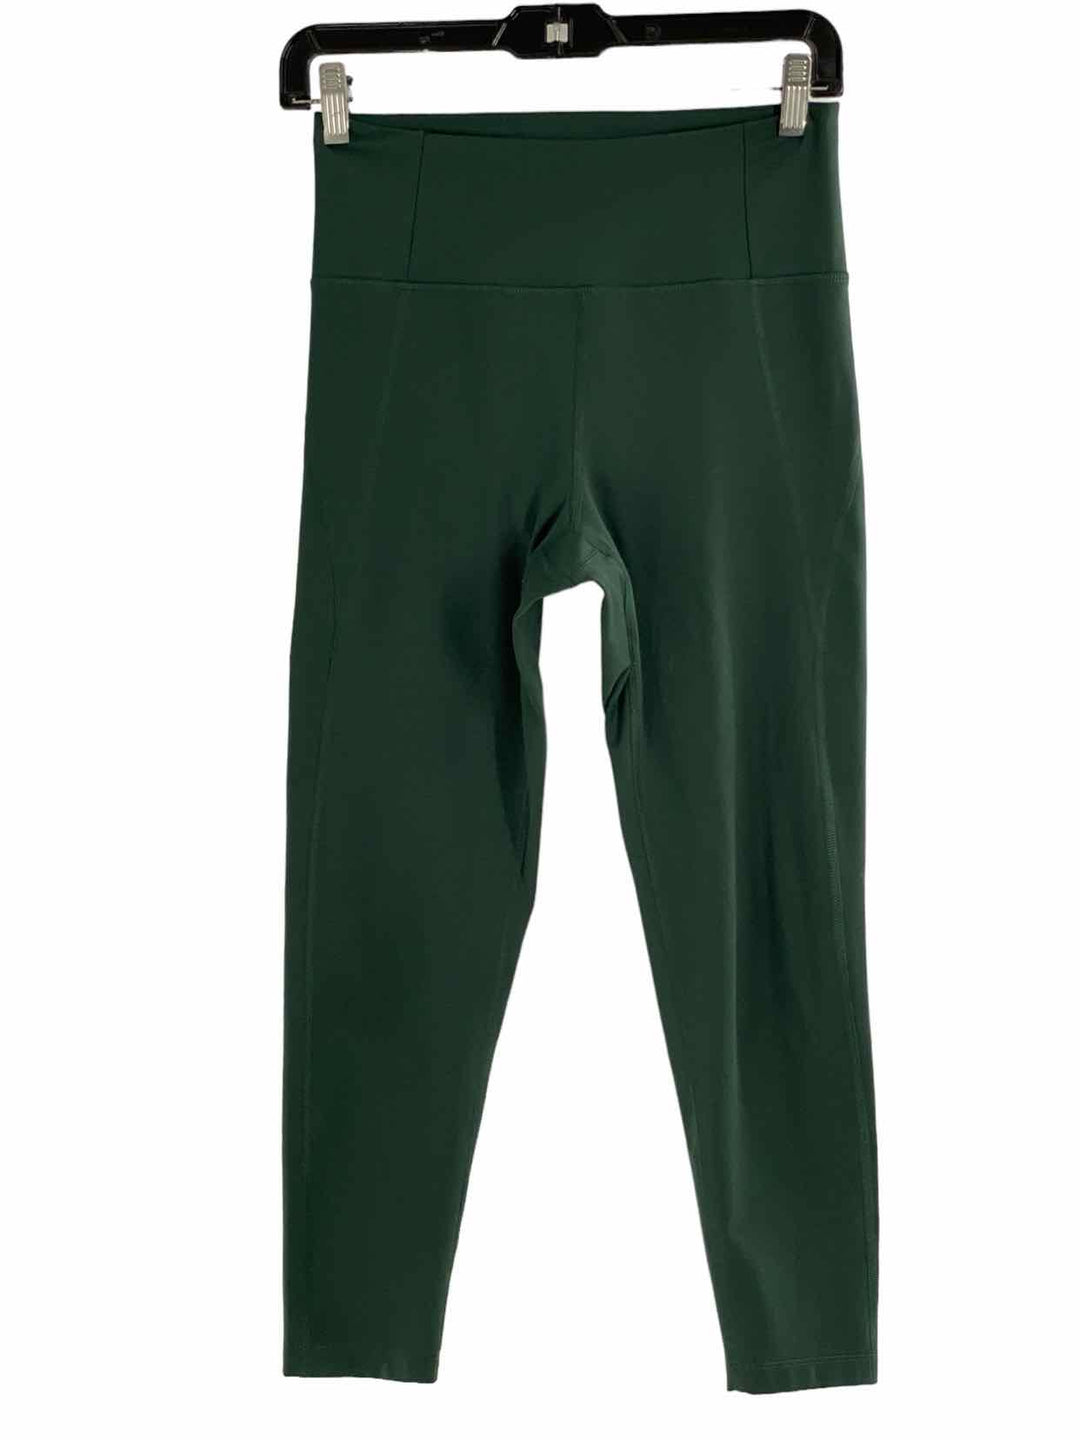 girlfriend collective Size M Forest  Green Athletic Pants